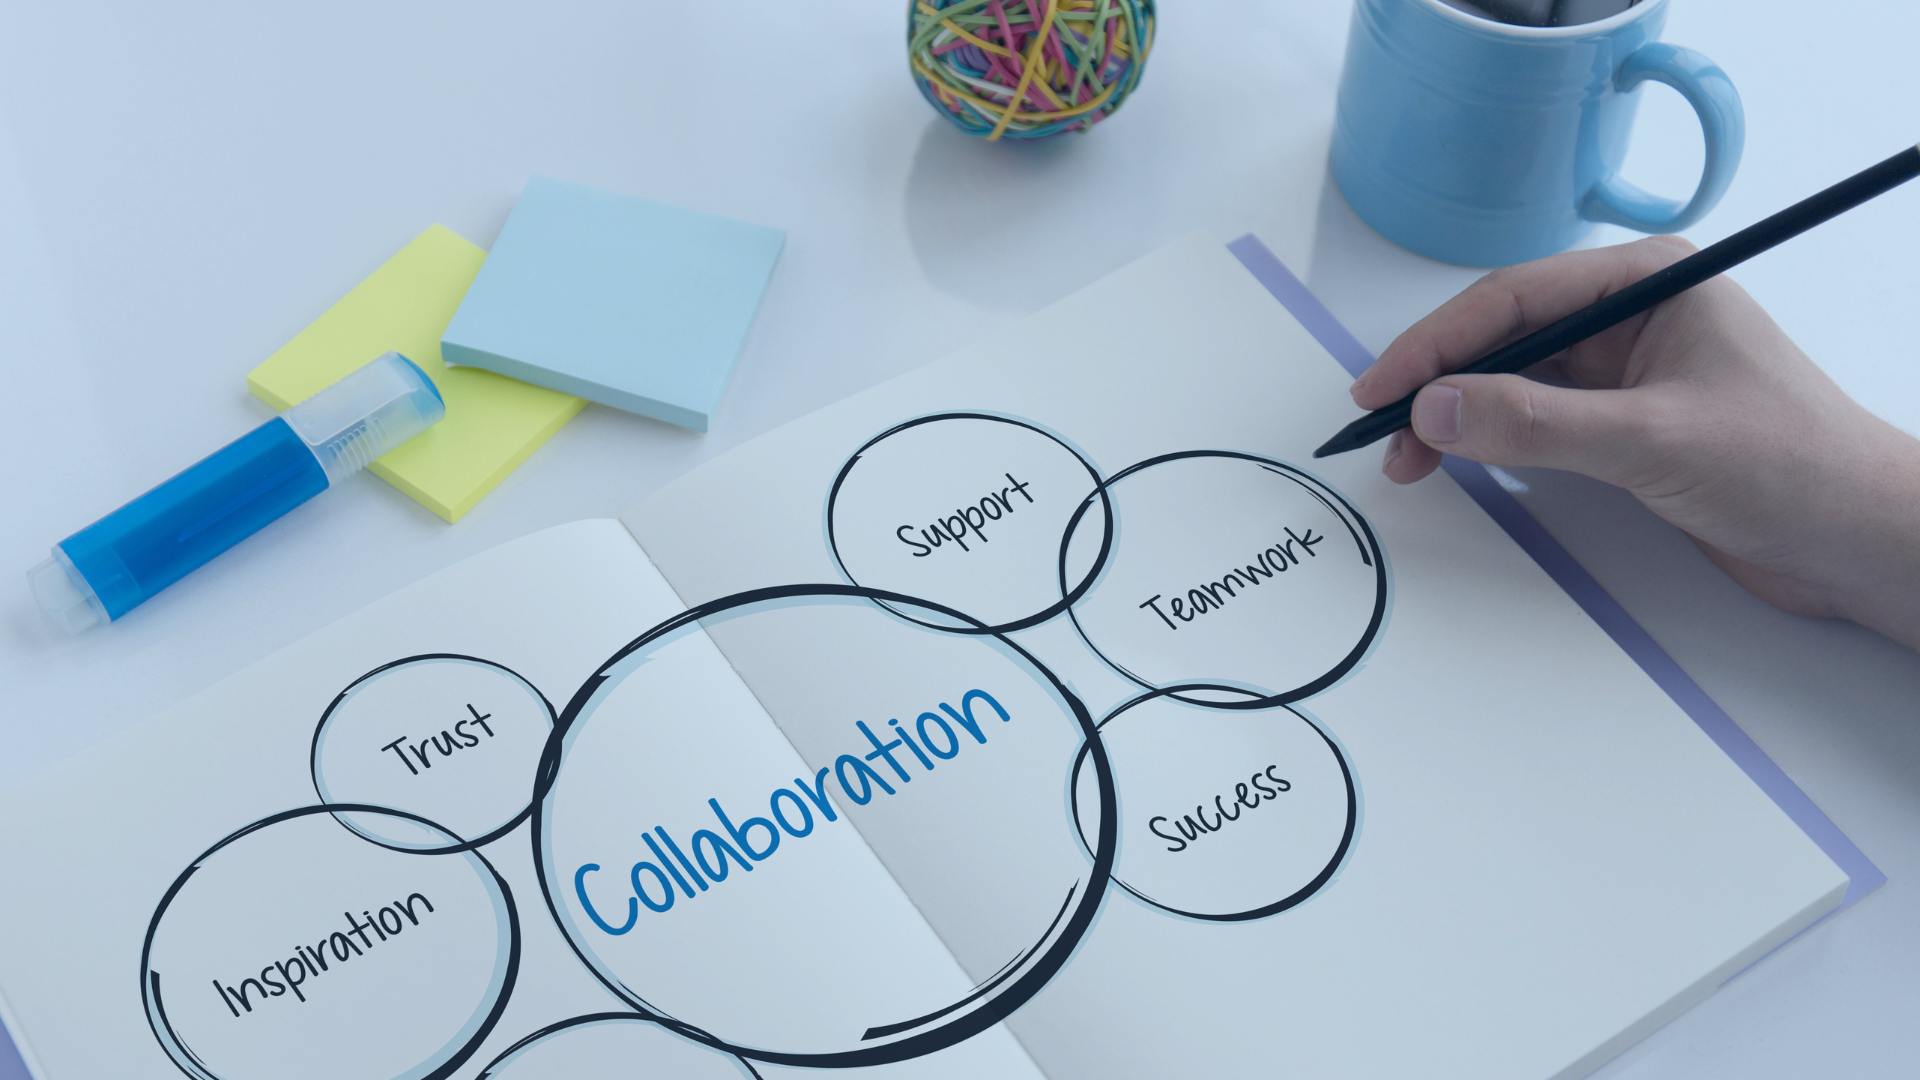 6 Strategies To Help You Build A Collaborative Team In Your Organization